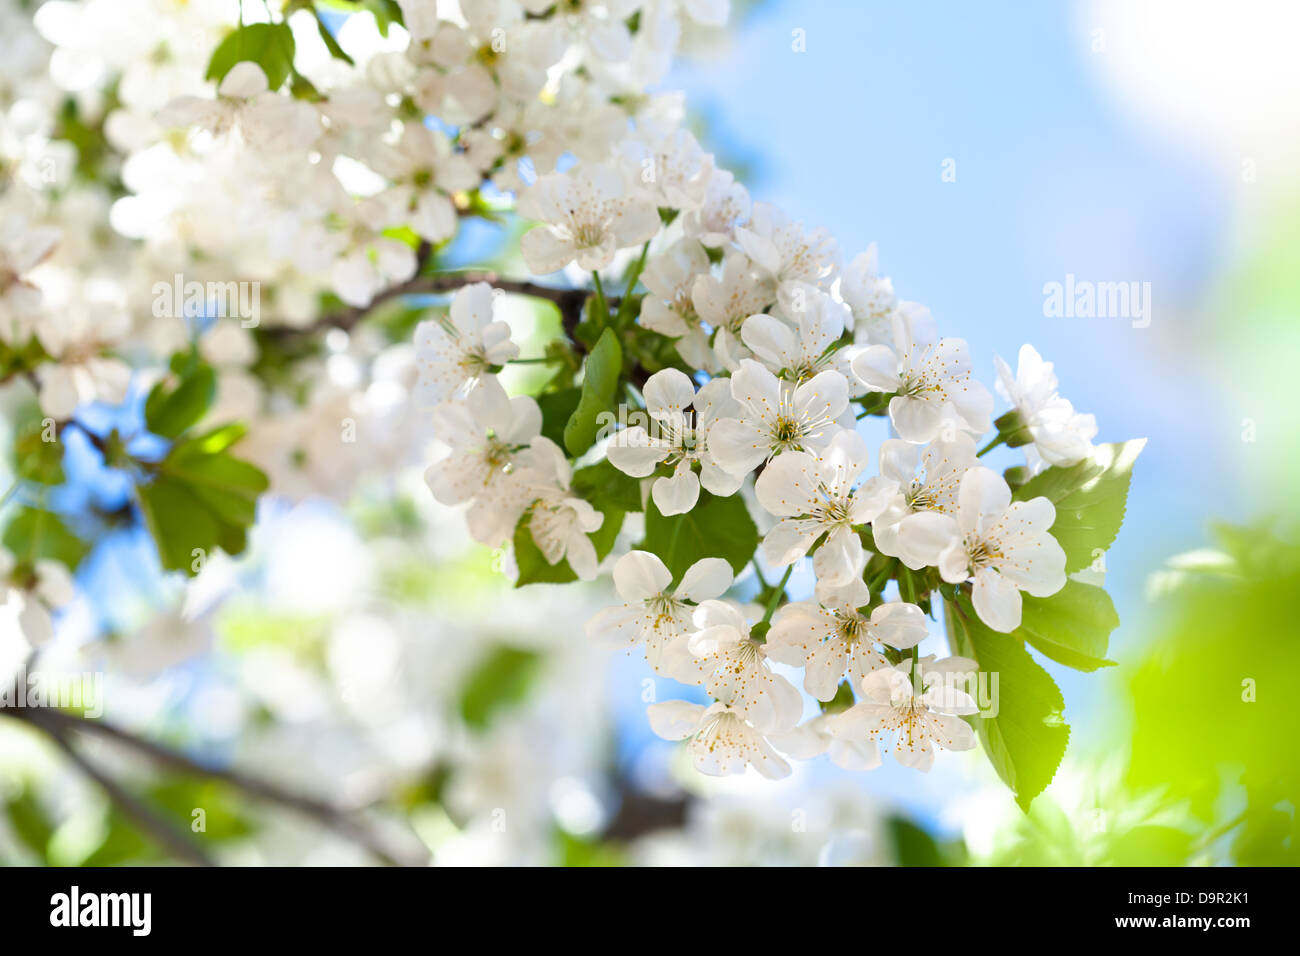 Cherry blossoms in full bloom Stock Photo